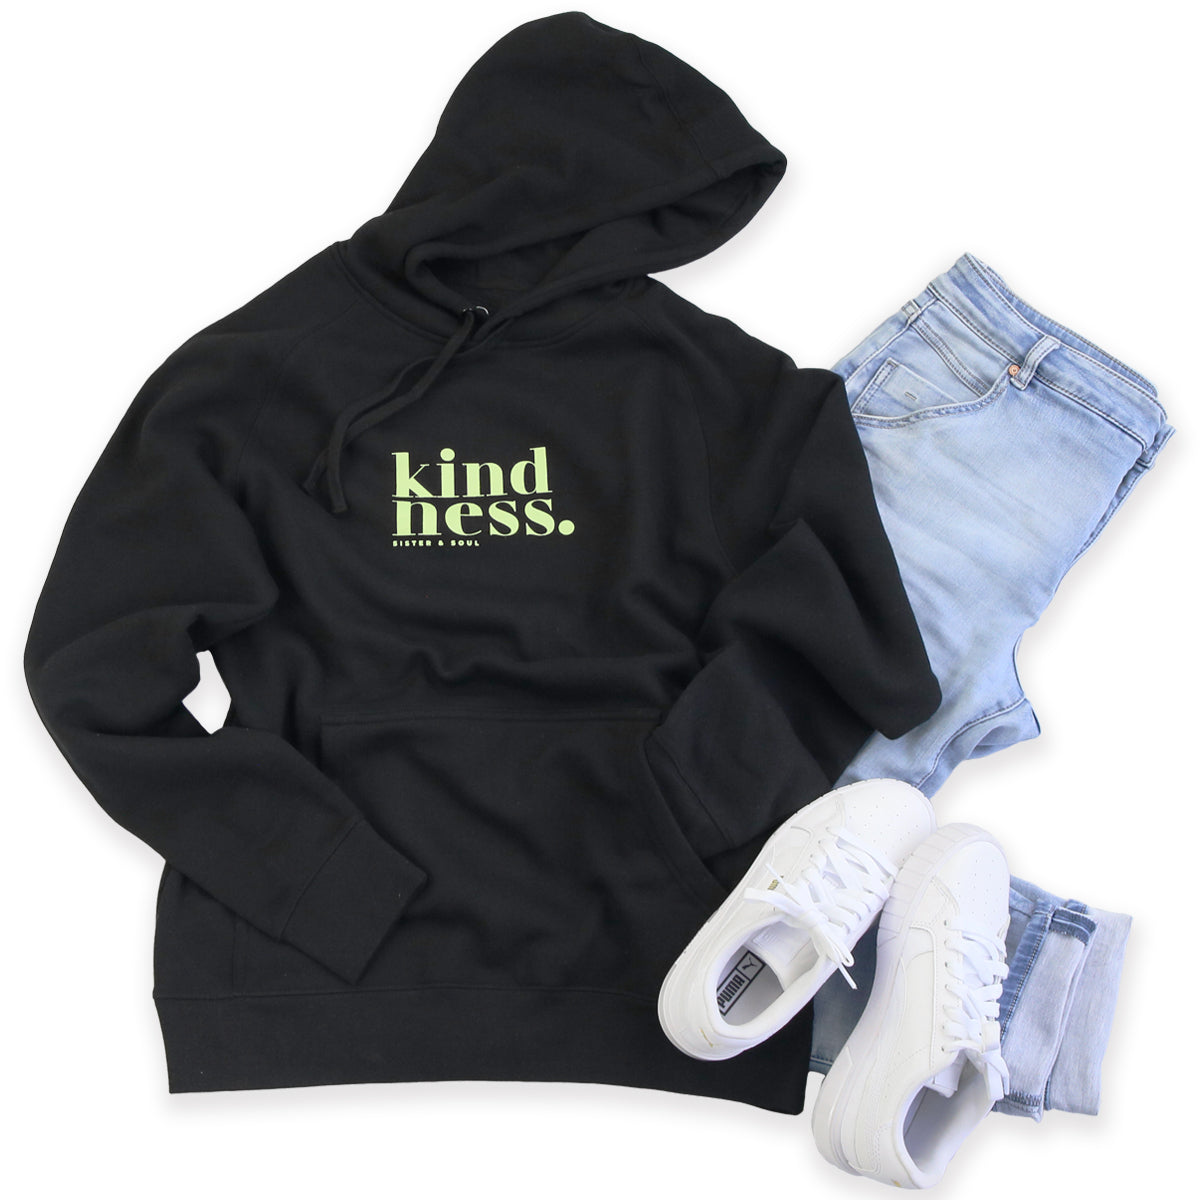 Kindness HOODIE - Black with Lime Print